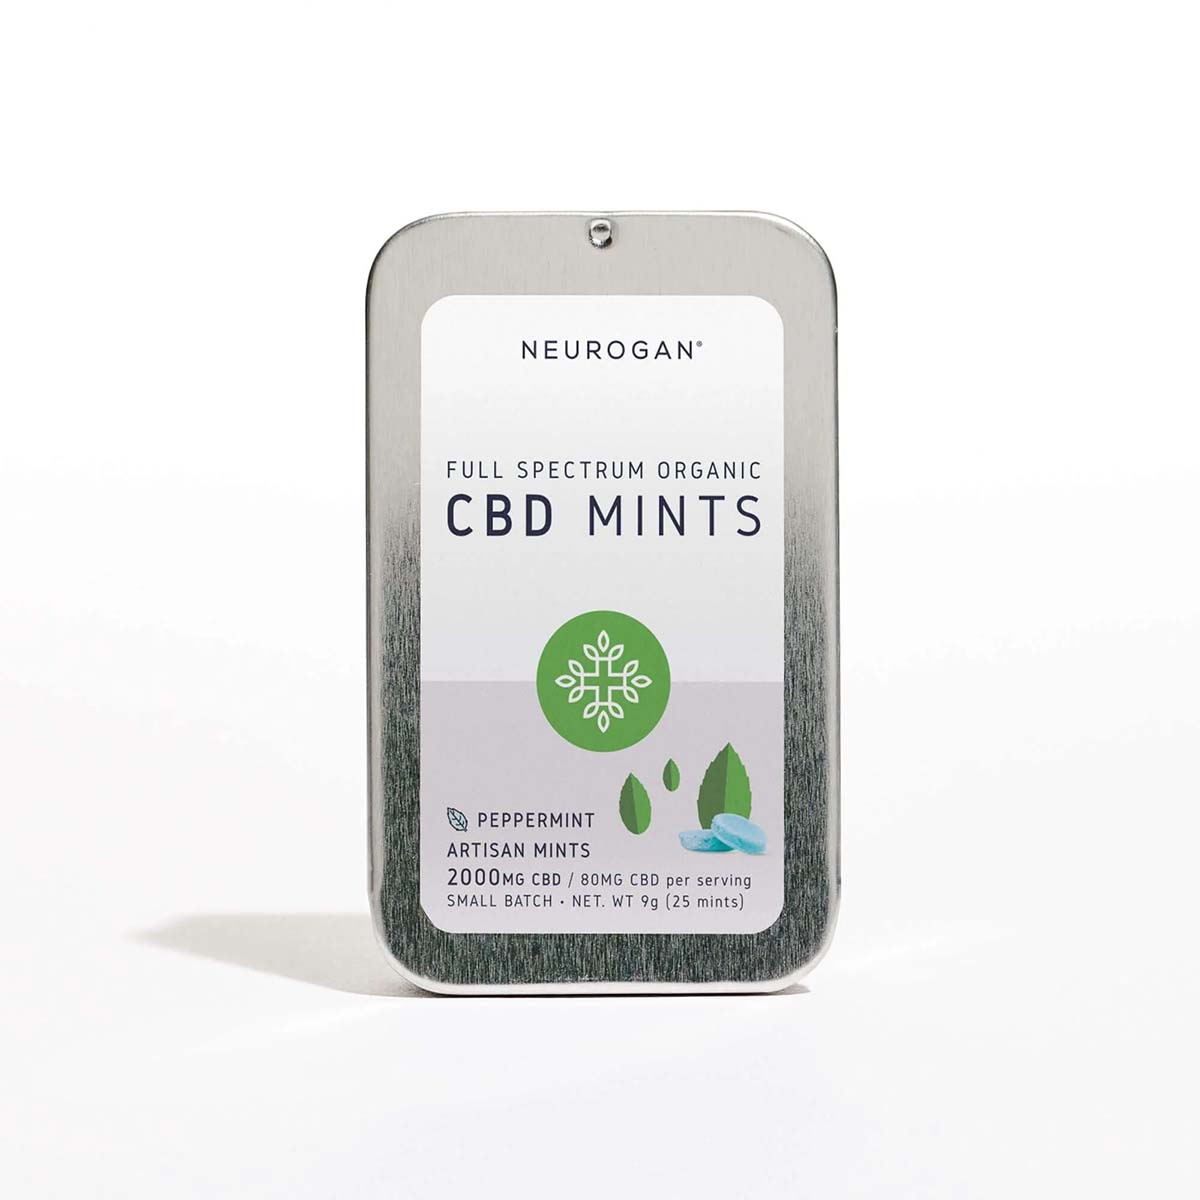 Silver tin of Neurogan CBD Mints with white and lavender label